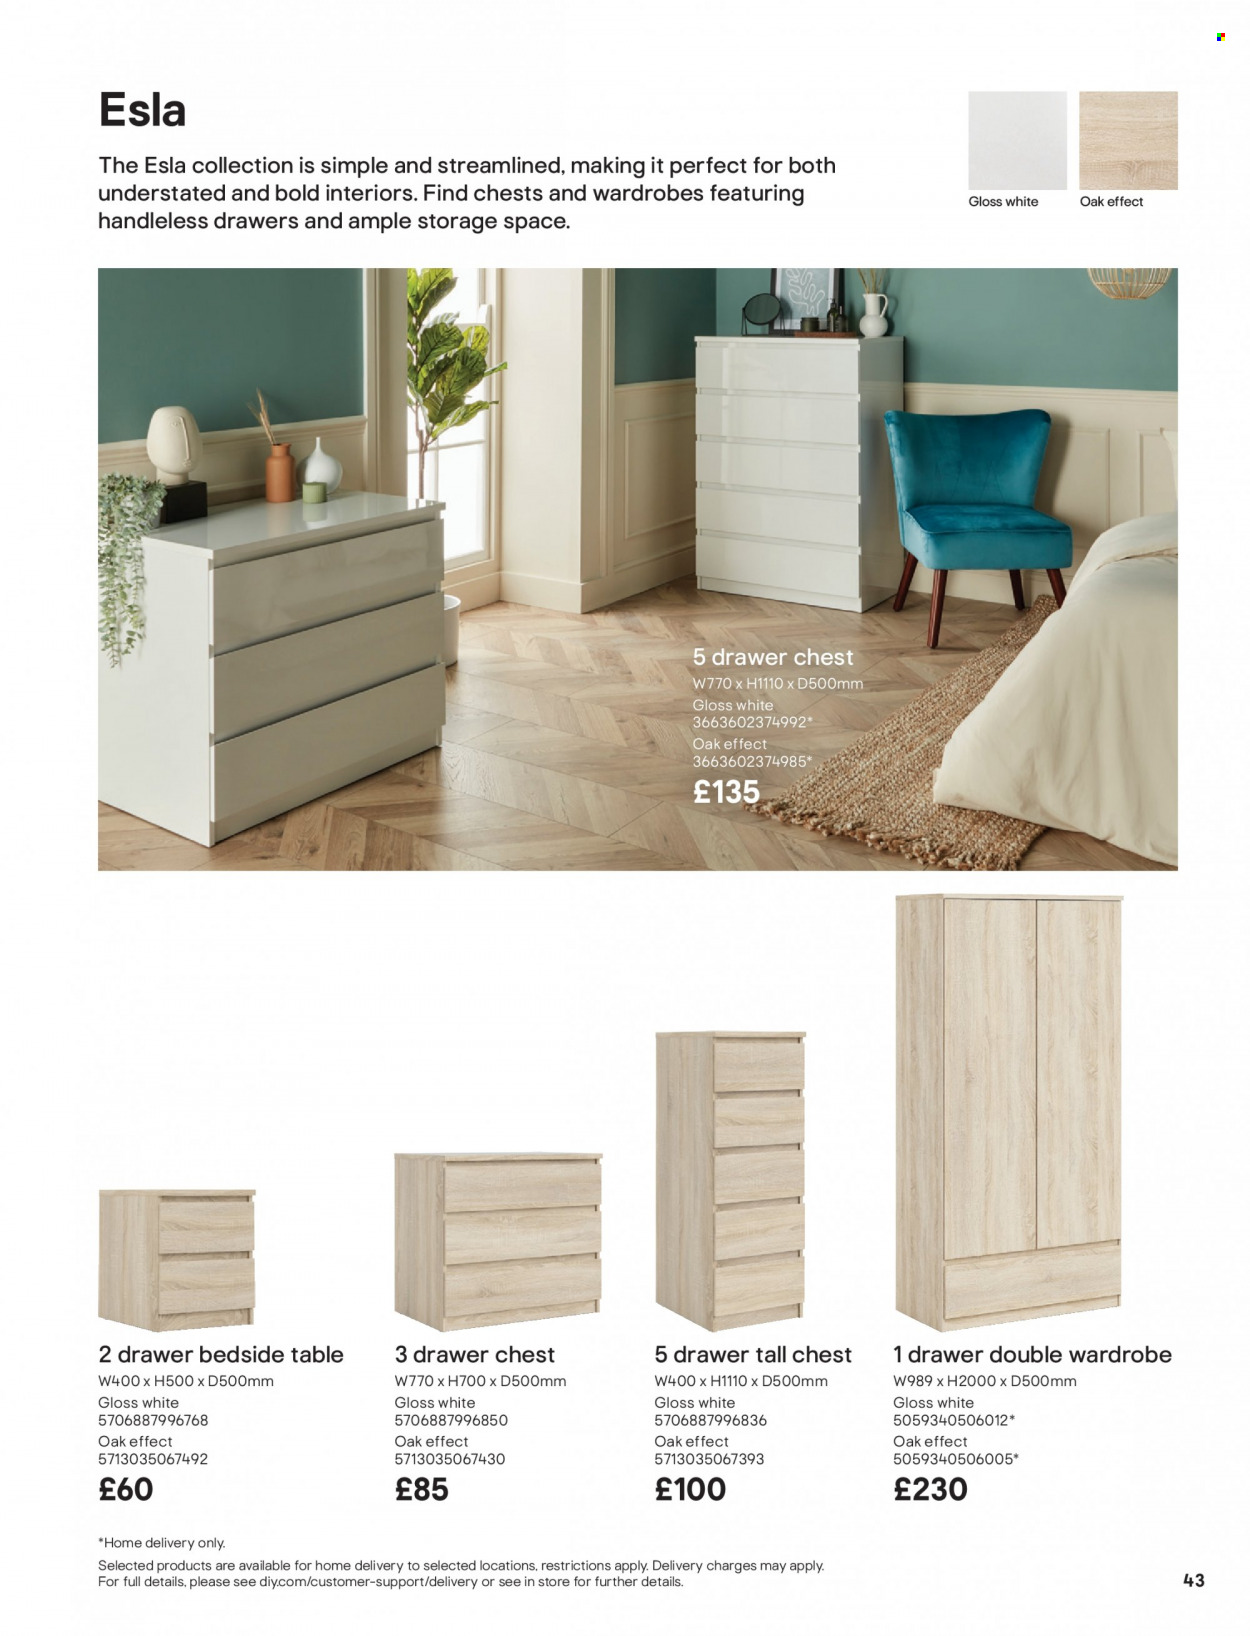 thumbnail - B&Q offer  - Sales products - chest of drawers, wardrobes, wardrobe, bedside table. Page 43.